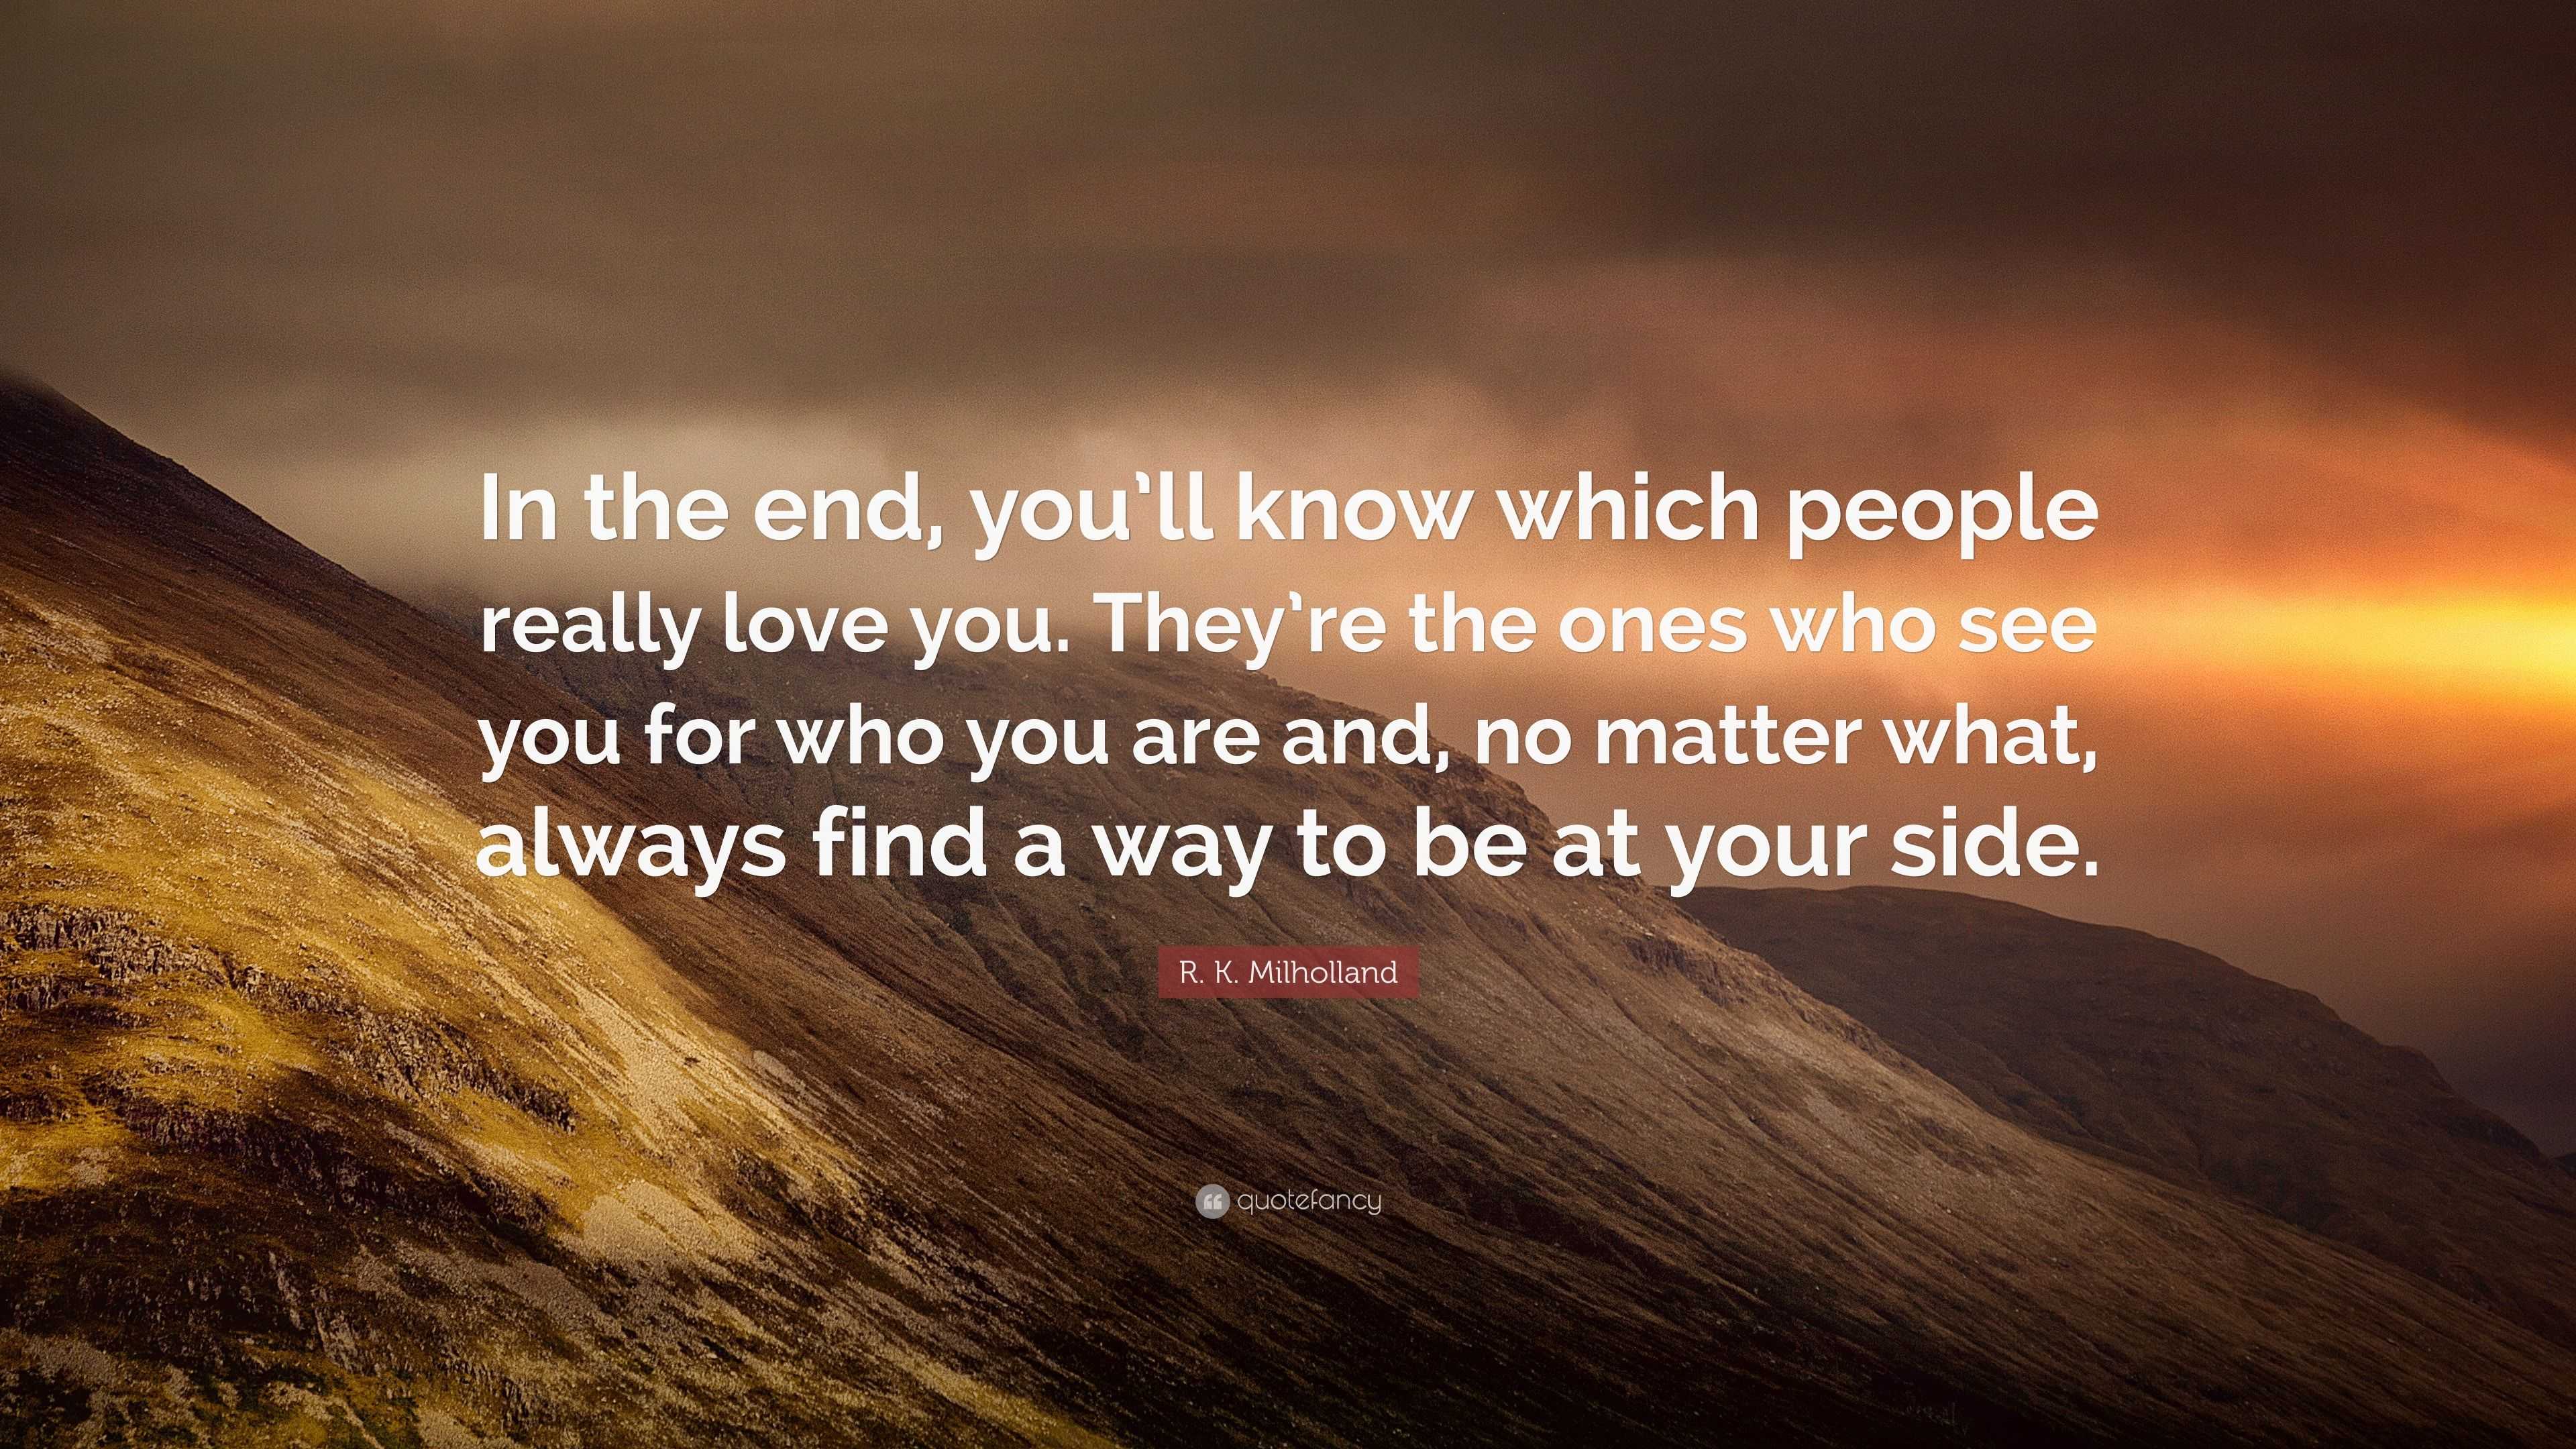 R K Milholland Quote “in The End You’ll Know Which People Really Love You They’re The Ones